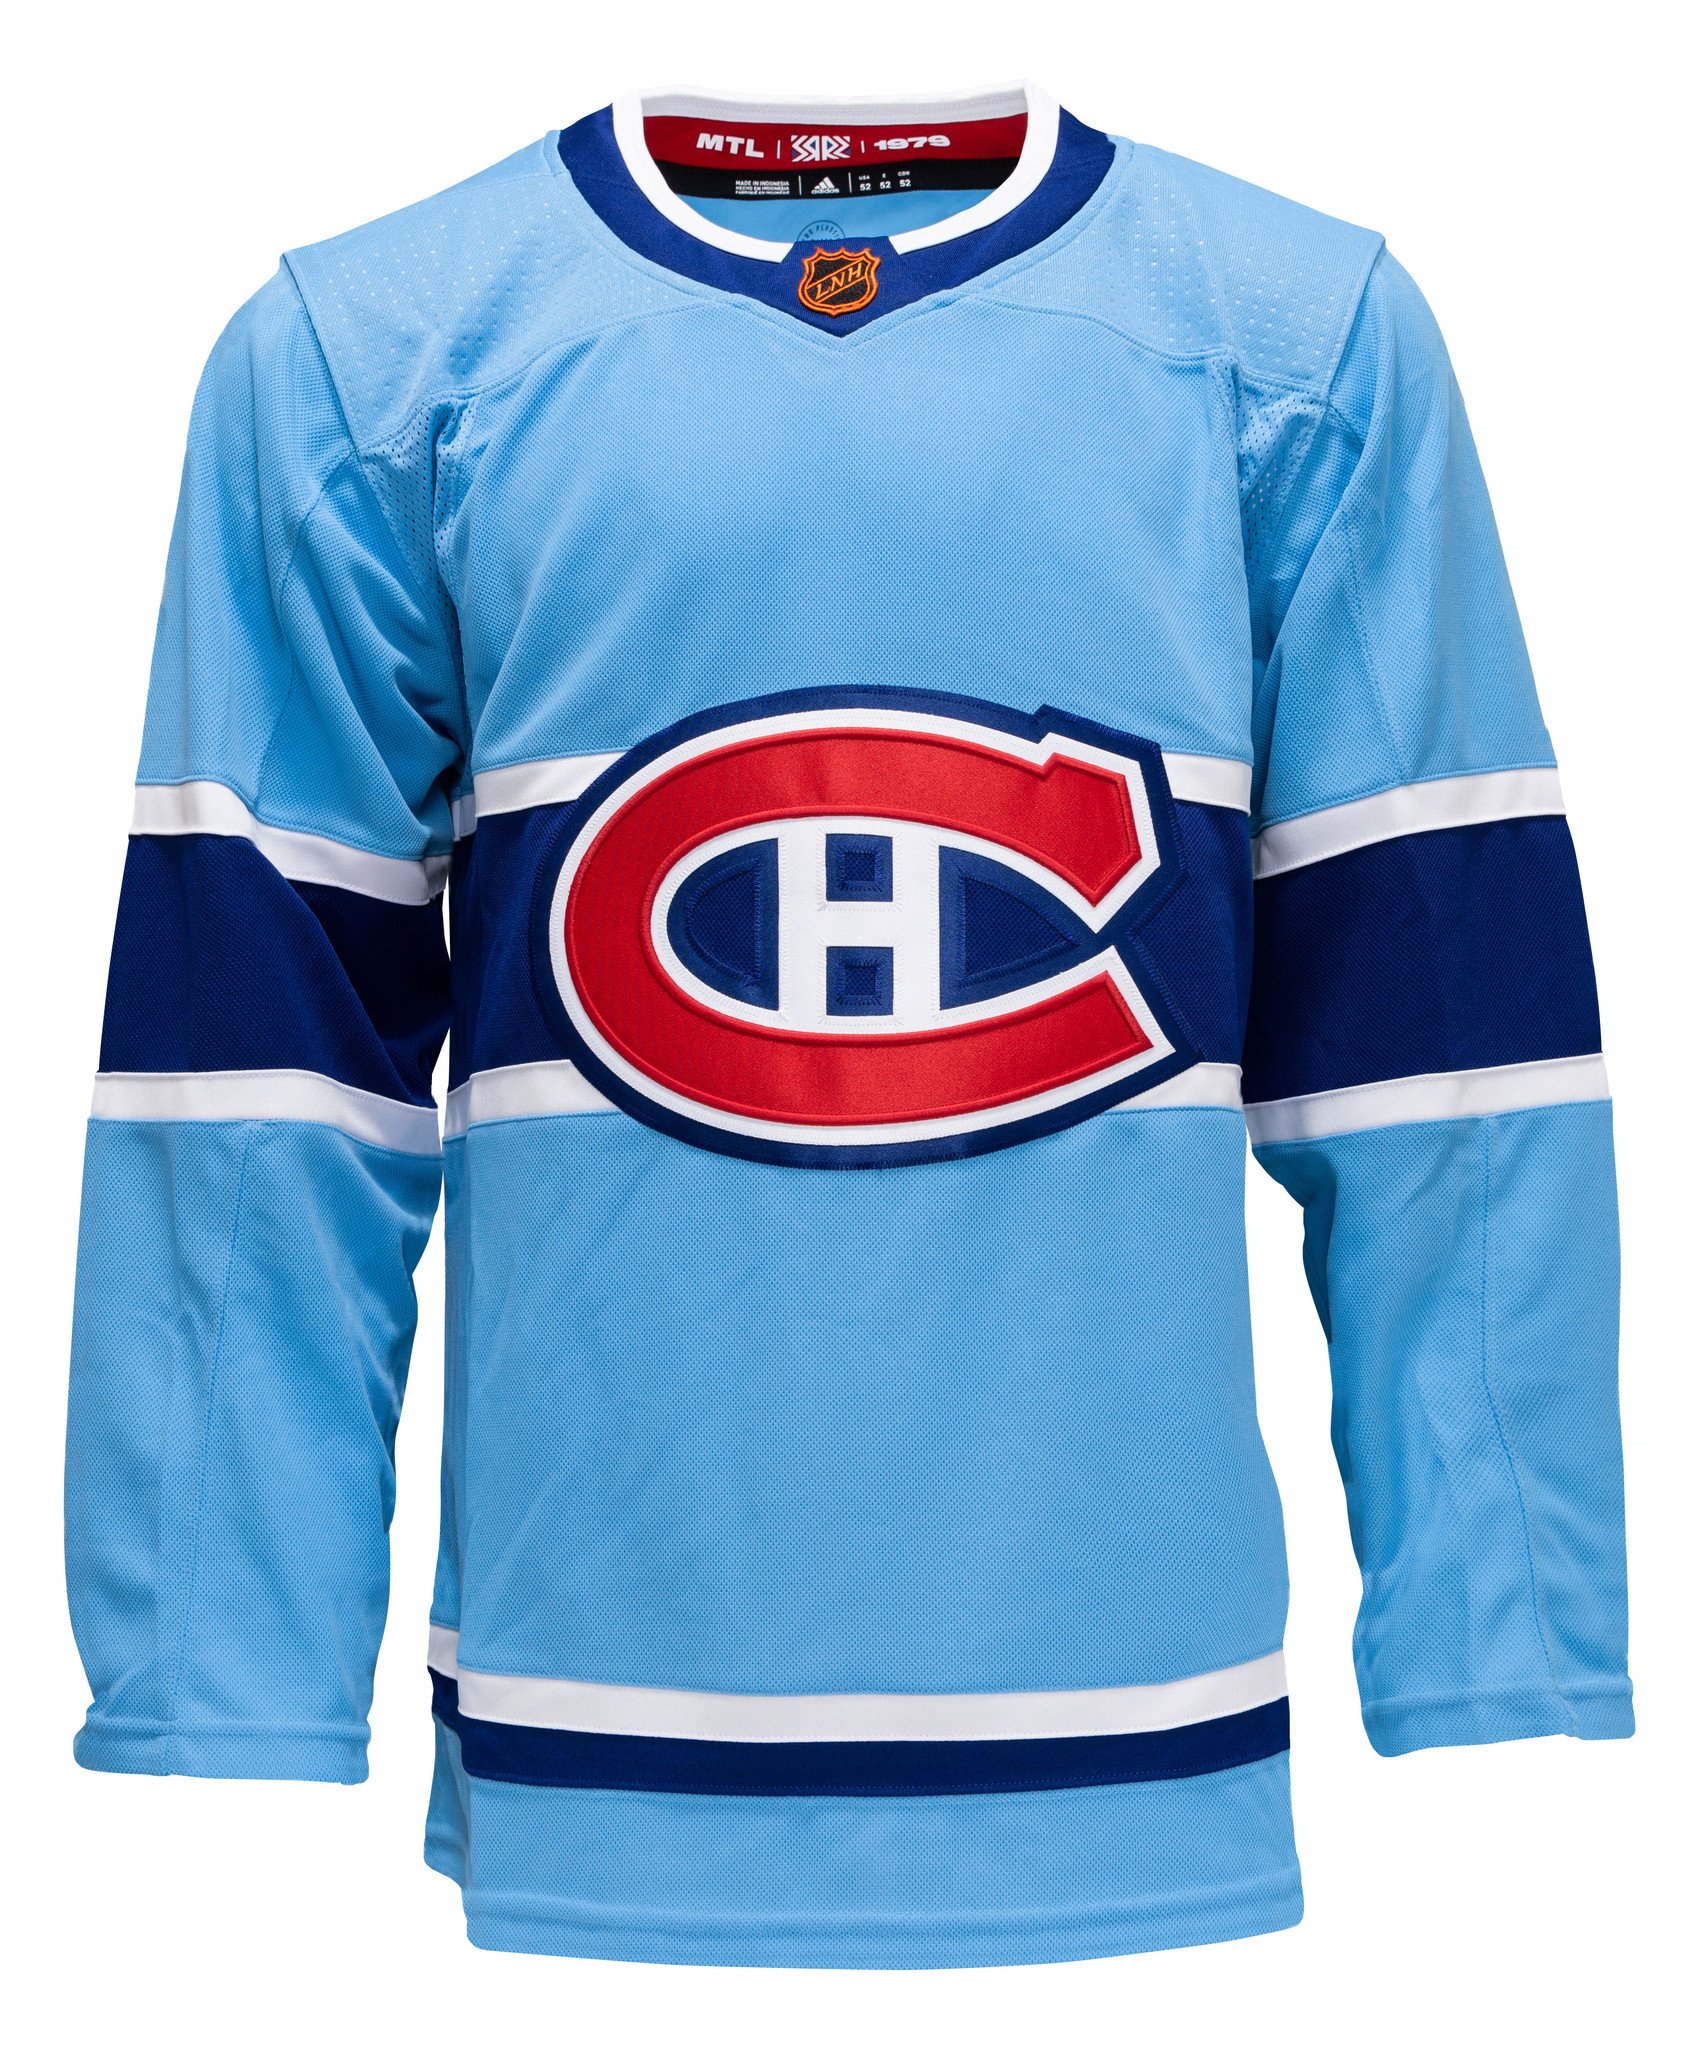 The new Reverse Retro Montreal Canadiens jerseys have arrived